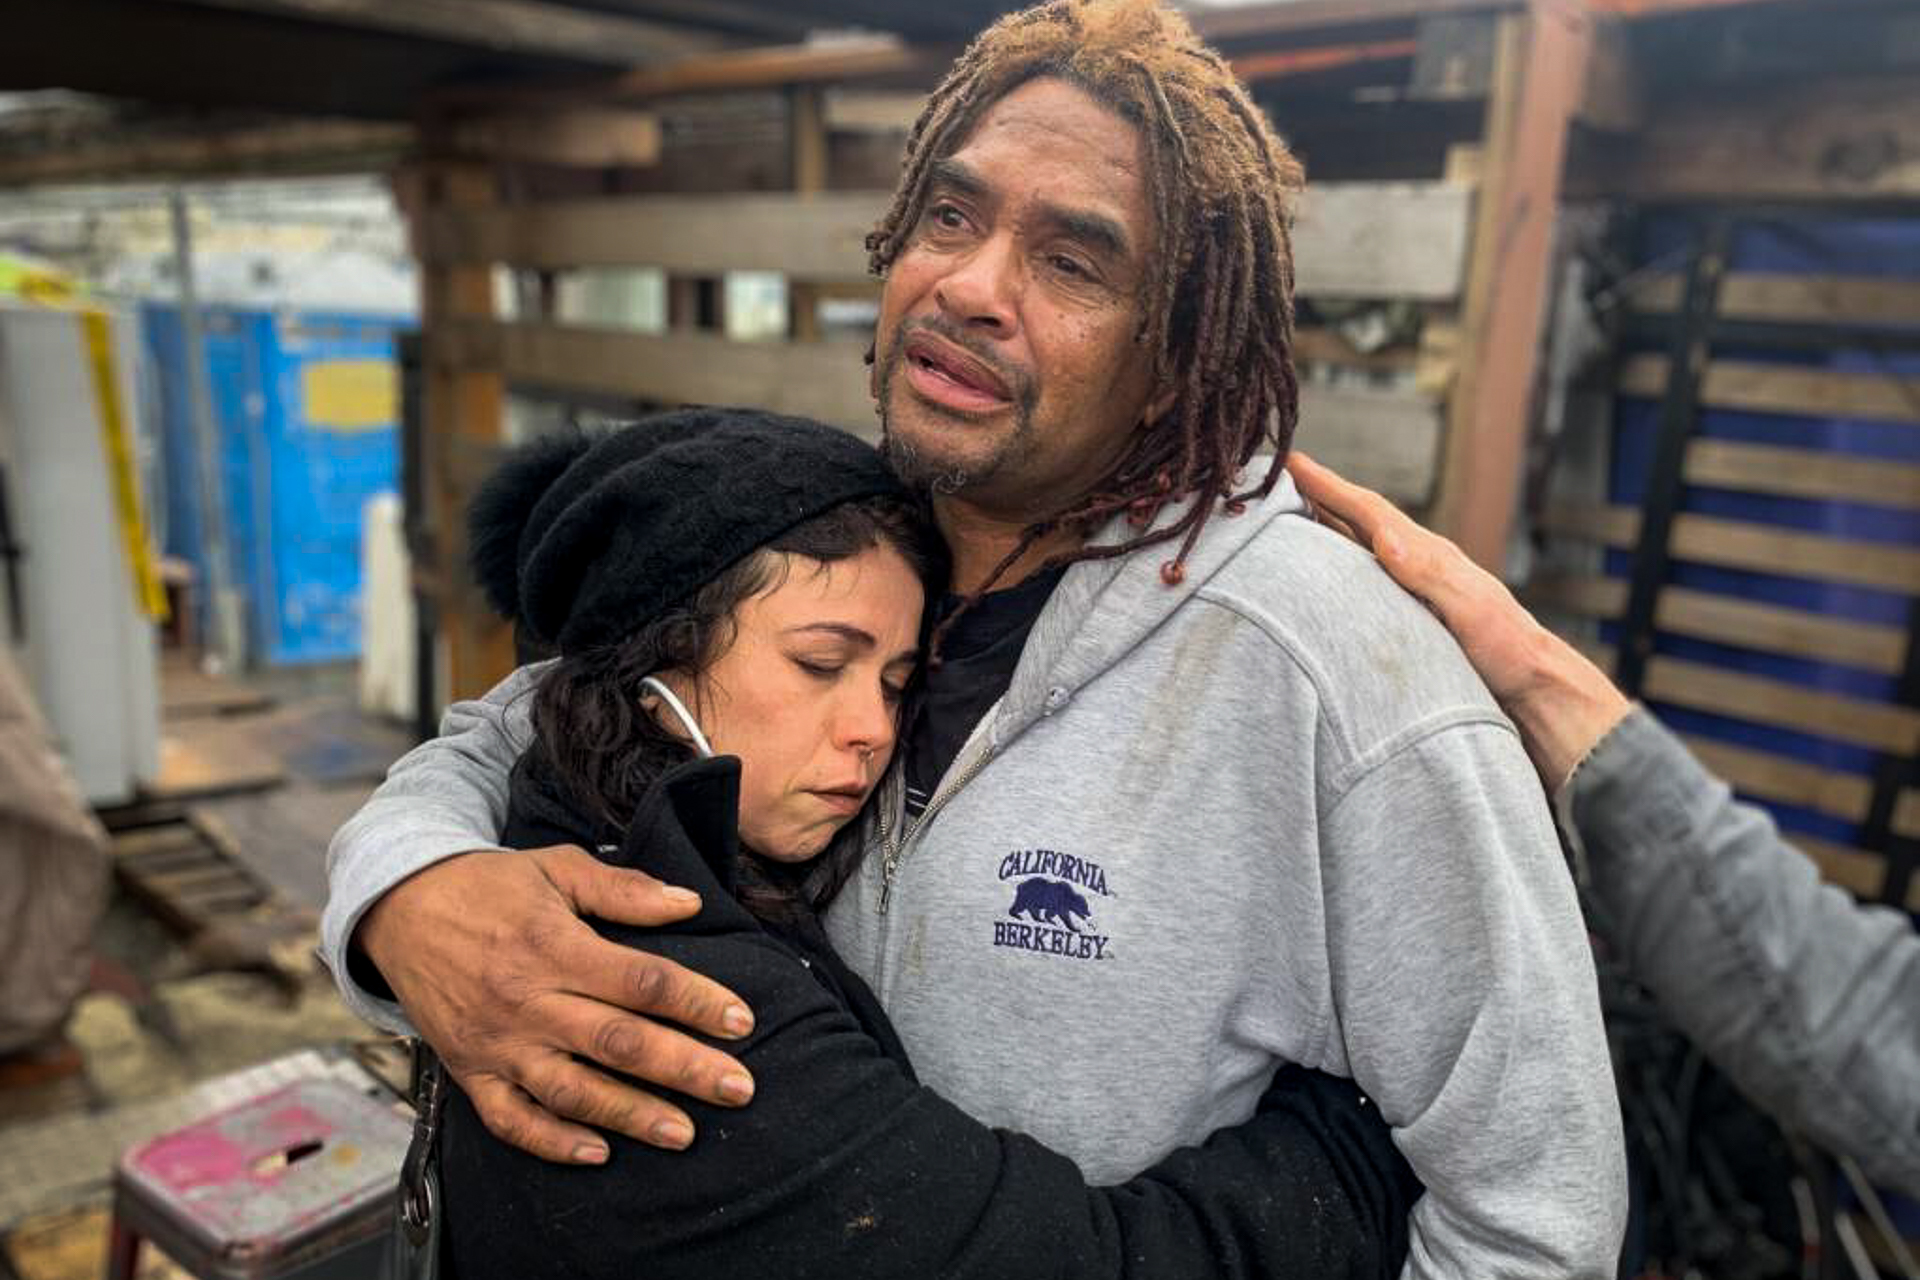 A woman in a black beanie and jacket hugs a man who is crying wearing a gray, hooded sweatshirt.